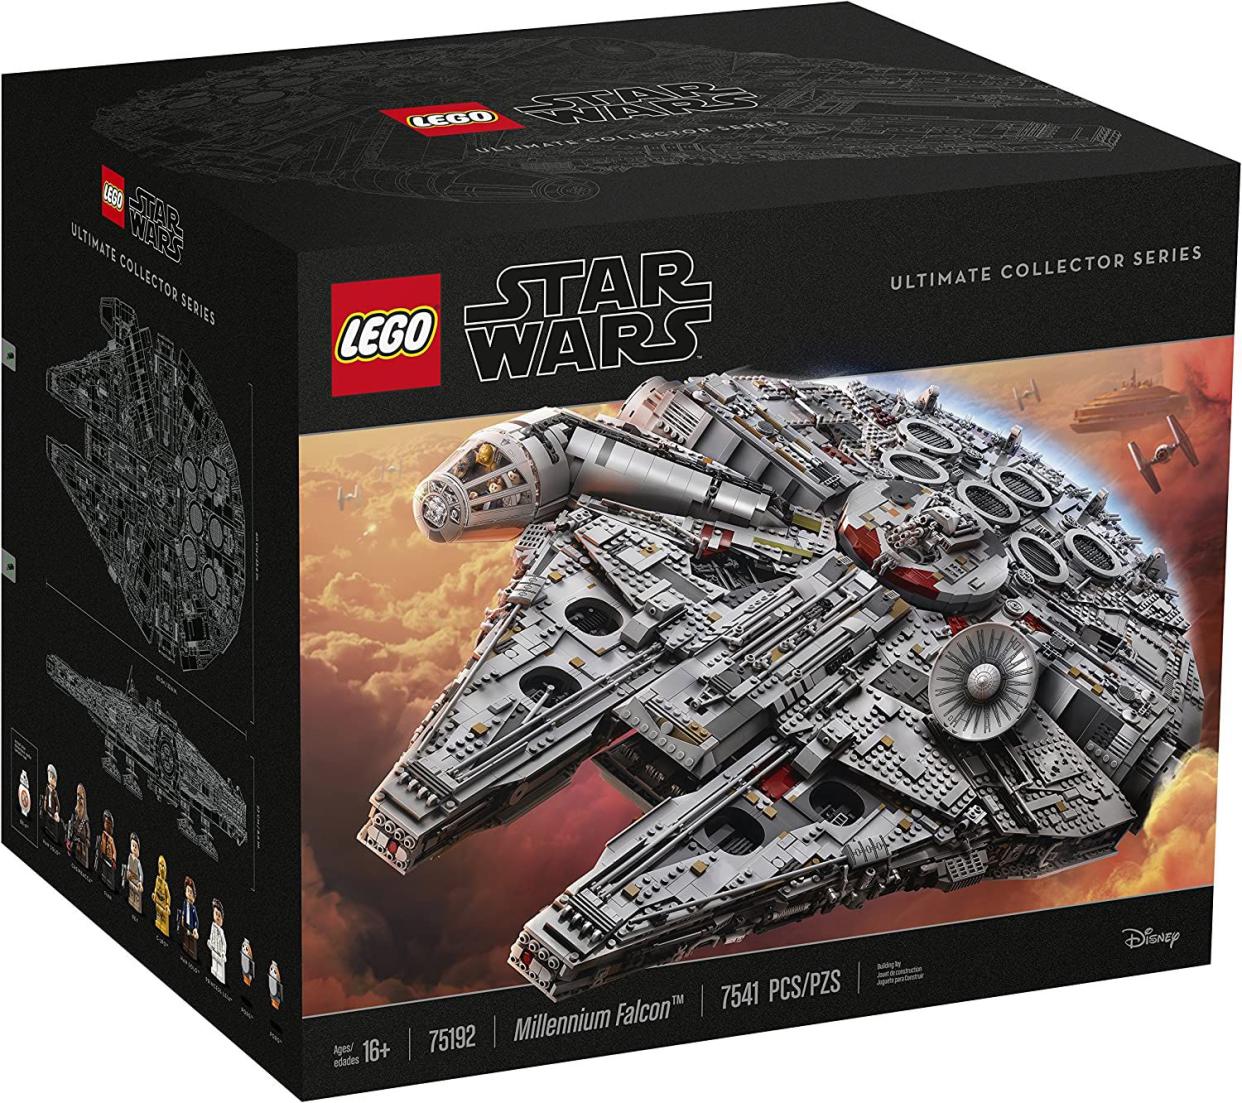 Overgang Alligevel kompleksitet 8 of the Most Expensive Lego Sets You Can Buy